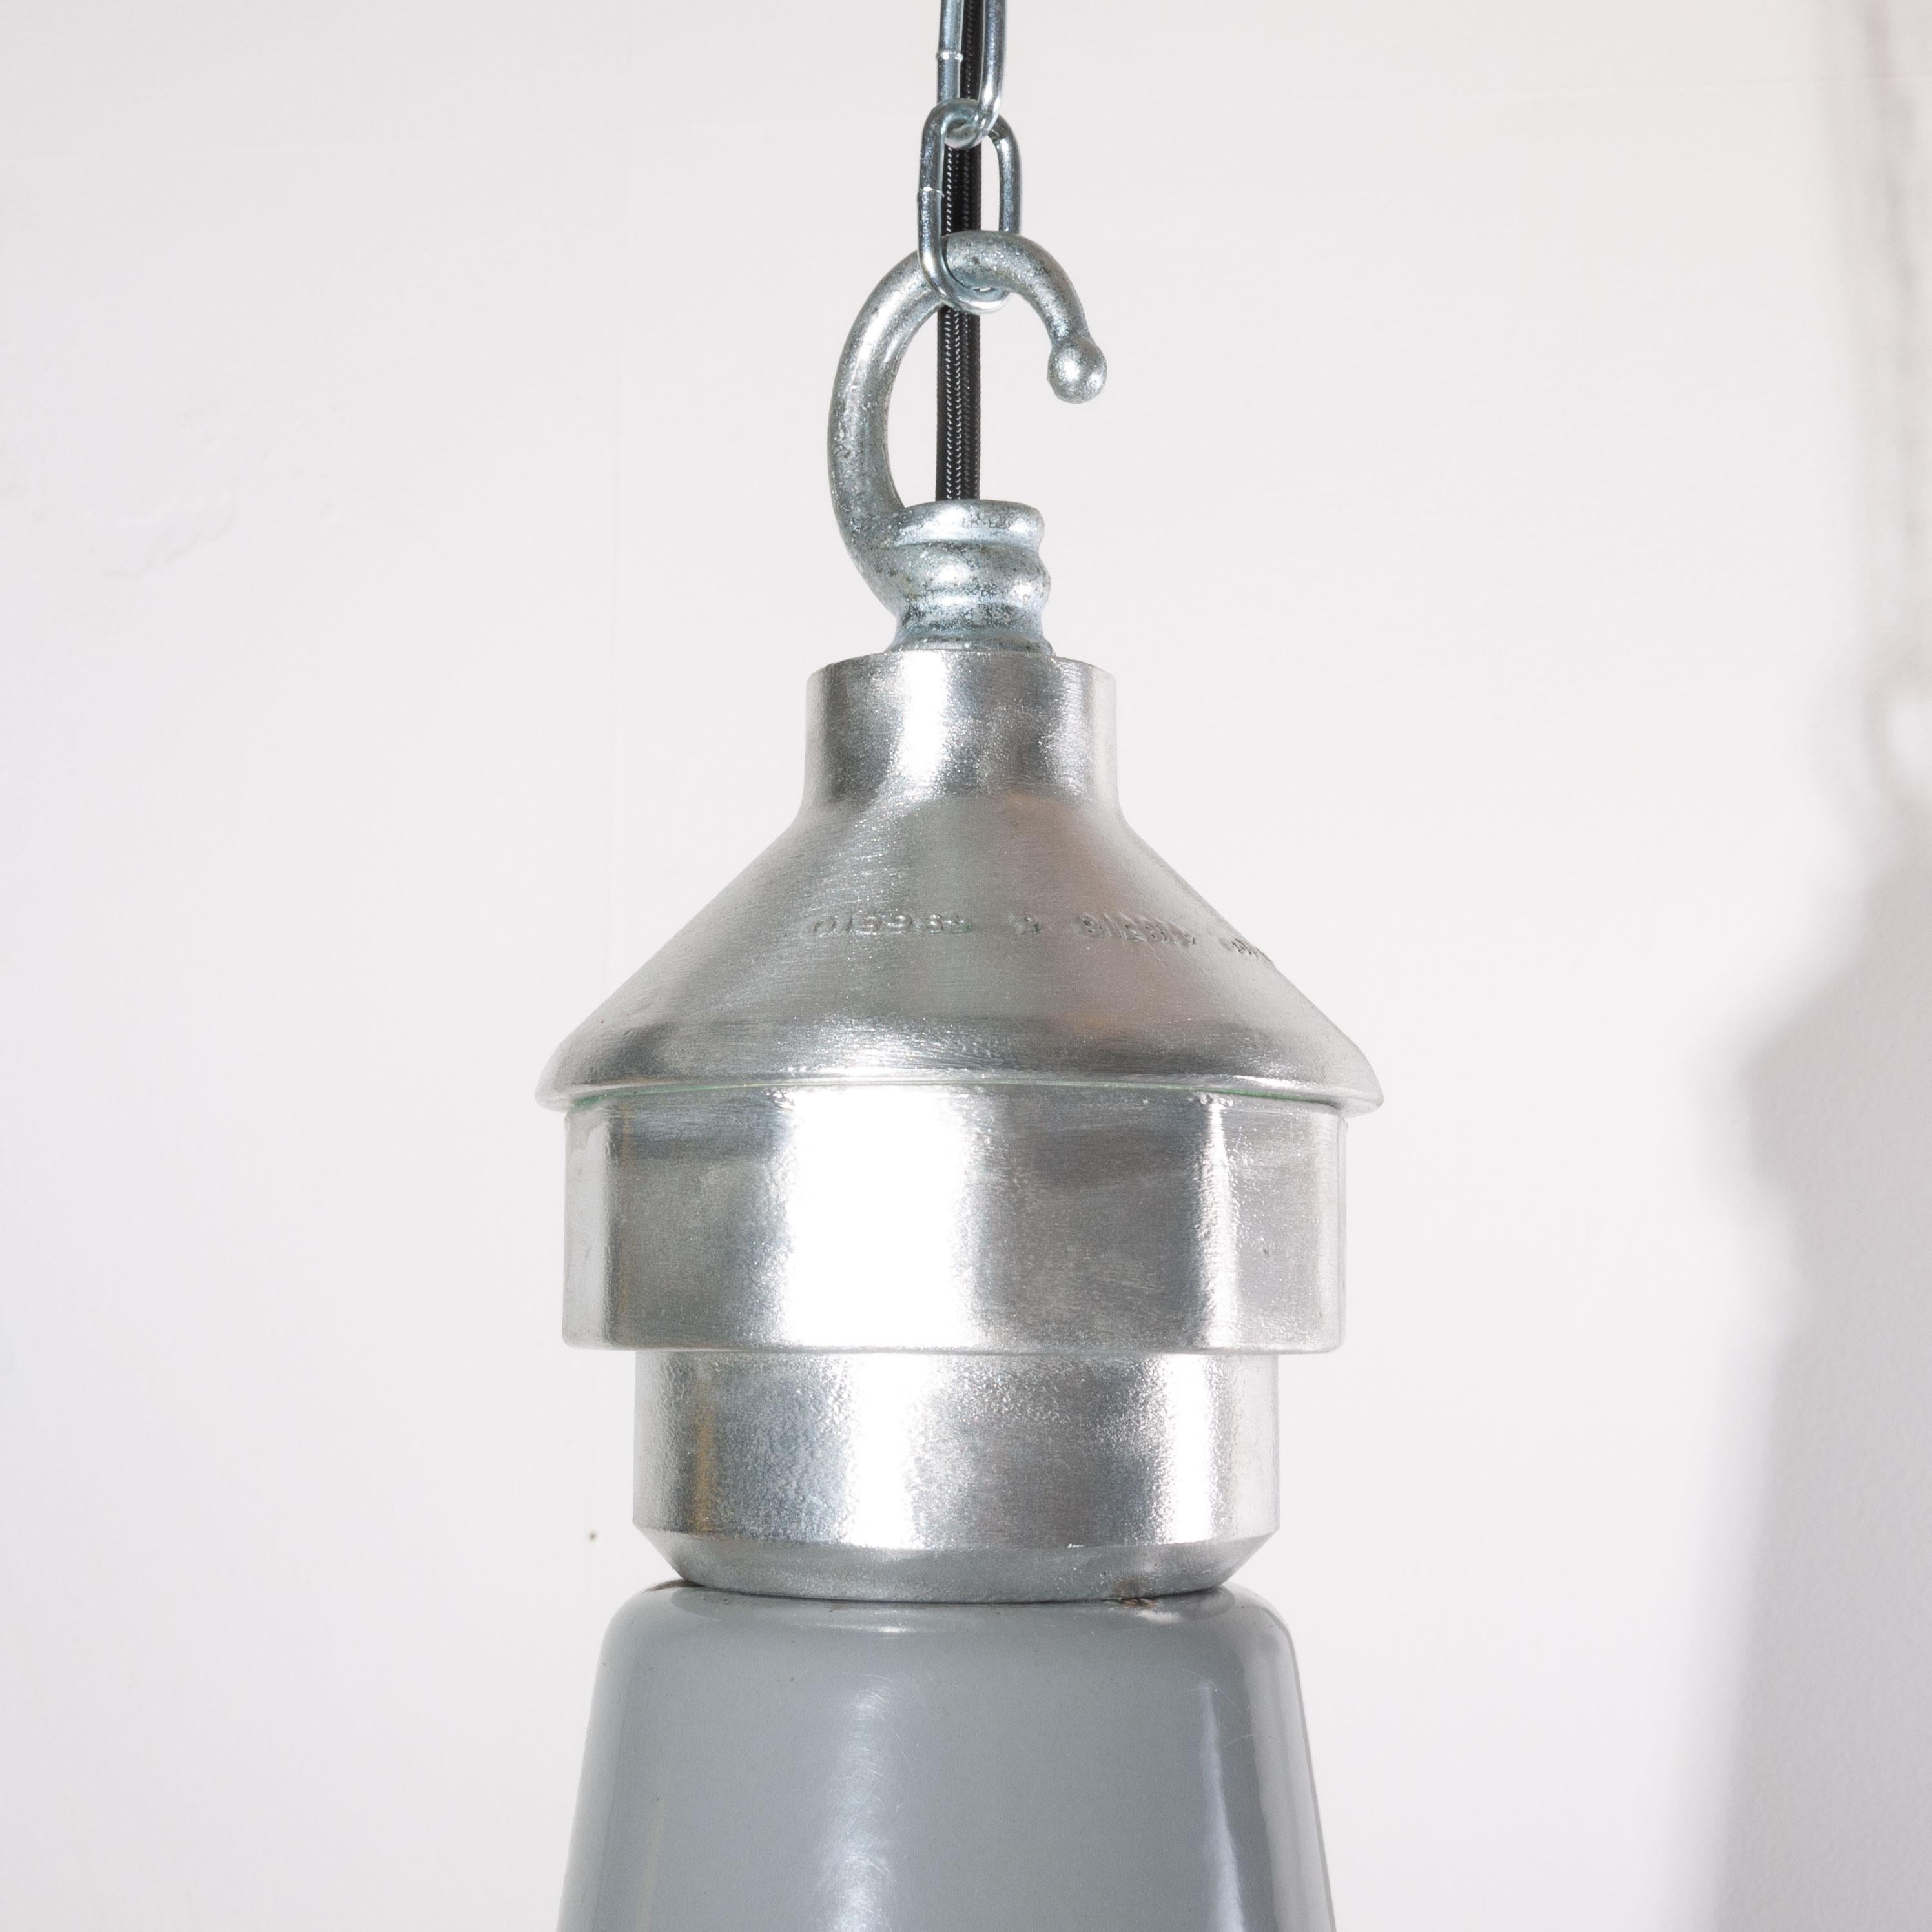 1950s Industrial large Benjamin enameled hanging ceiling pendant lamps/lights
1950s Industrial large Benjamin enameled hanging ceiling pendant lamps/lights. Benjamin was arguably the market leader in Industrial lighting in the 1930s through to